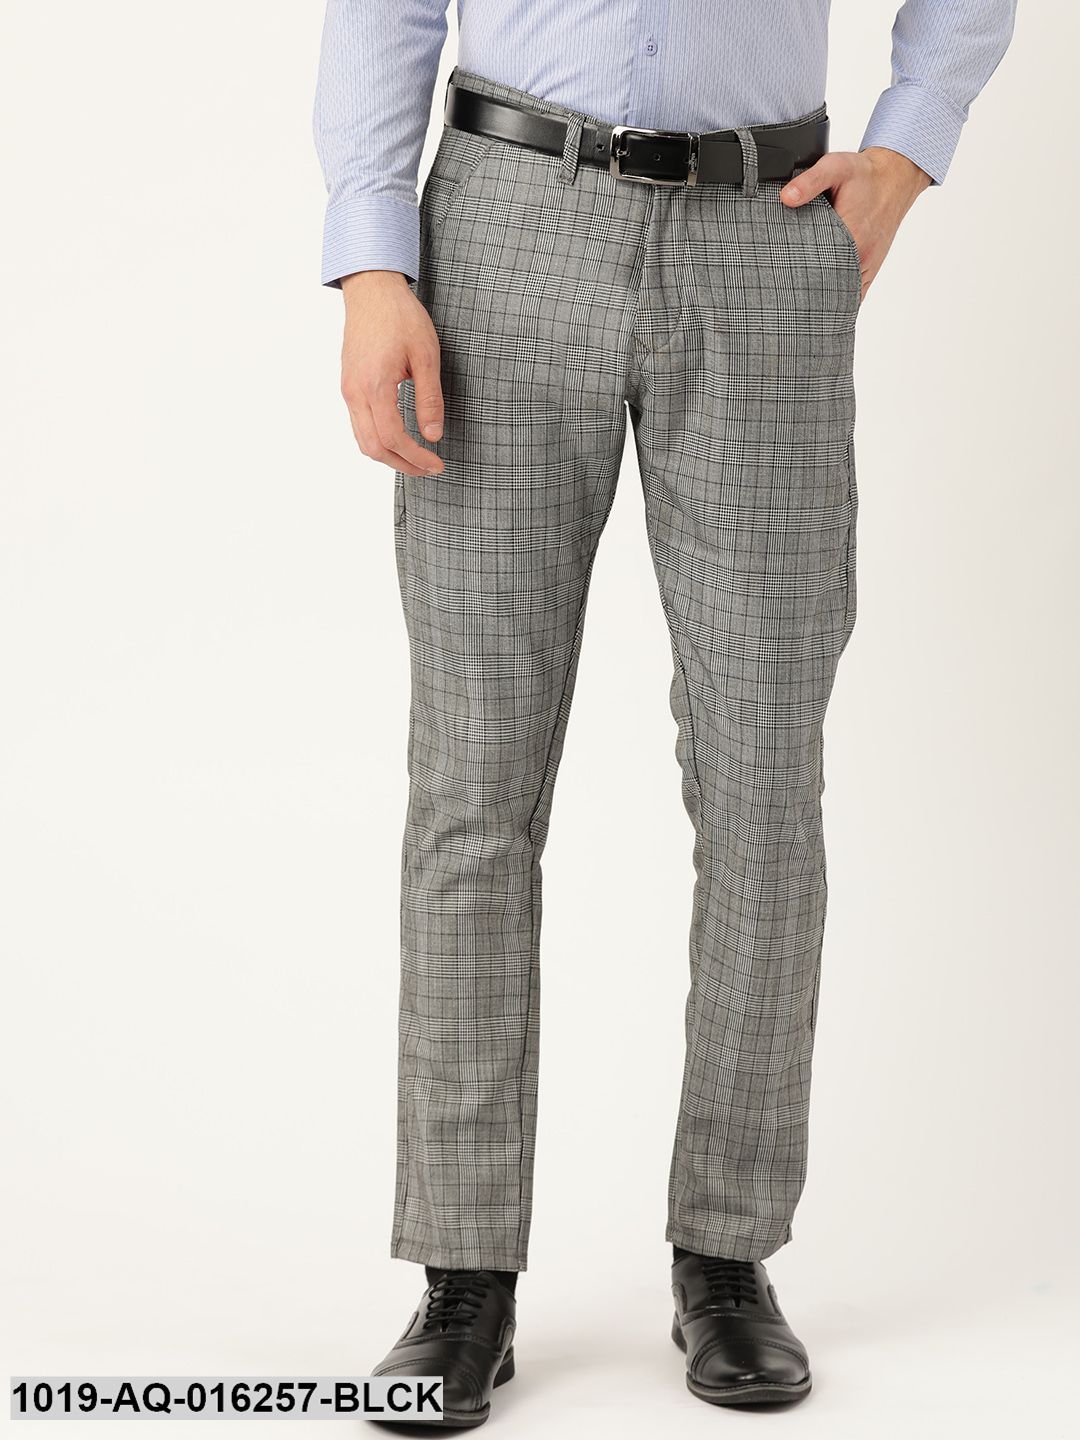 Buy Arrow Slim Fit Patterned Check Formal Trousers - NNNOW.com